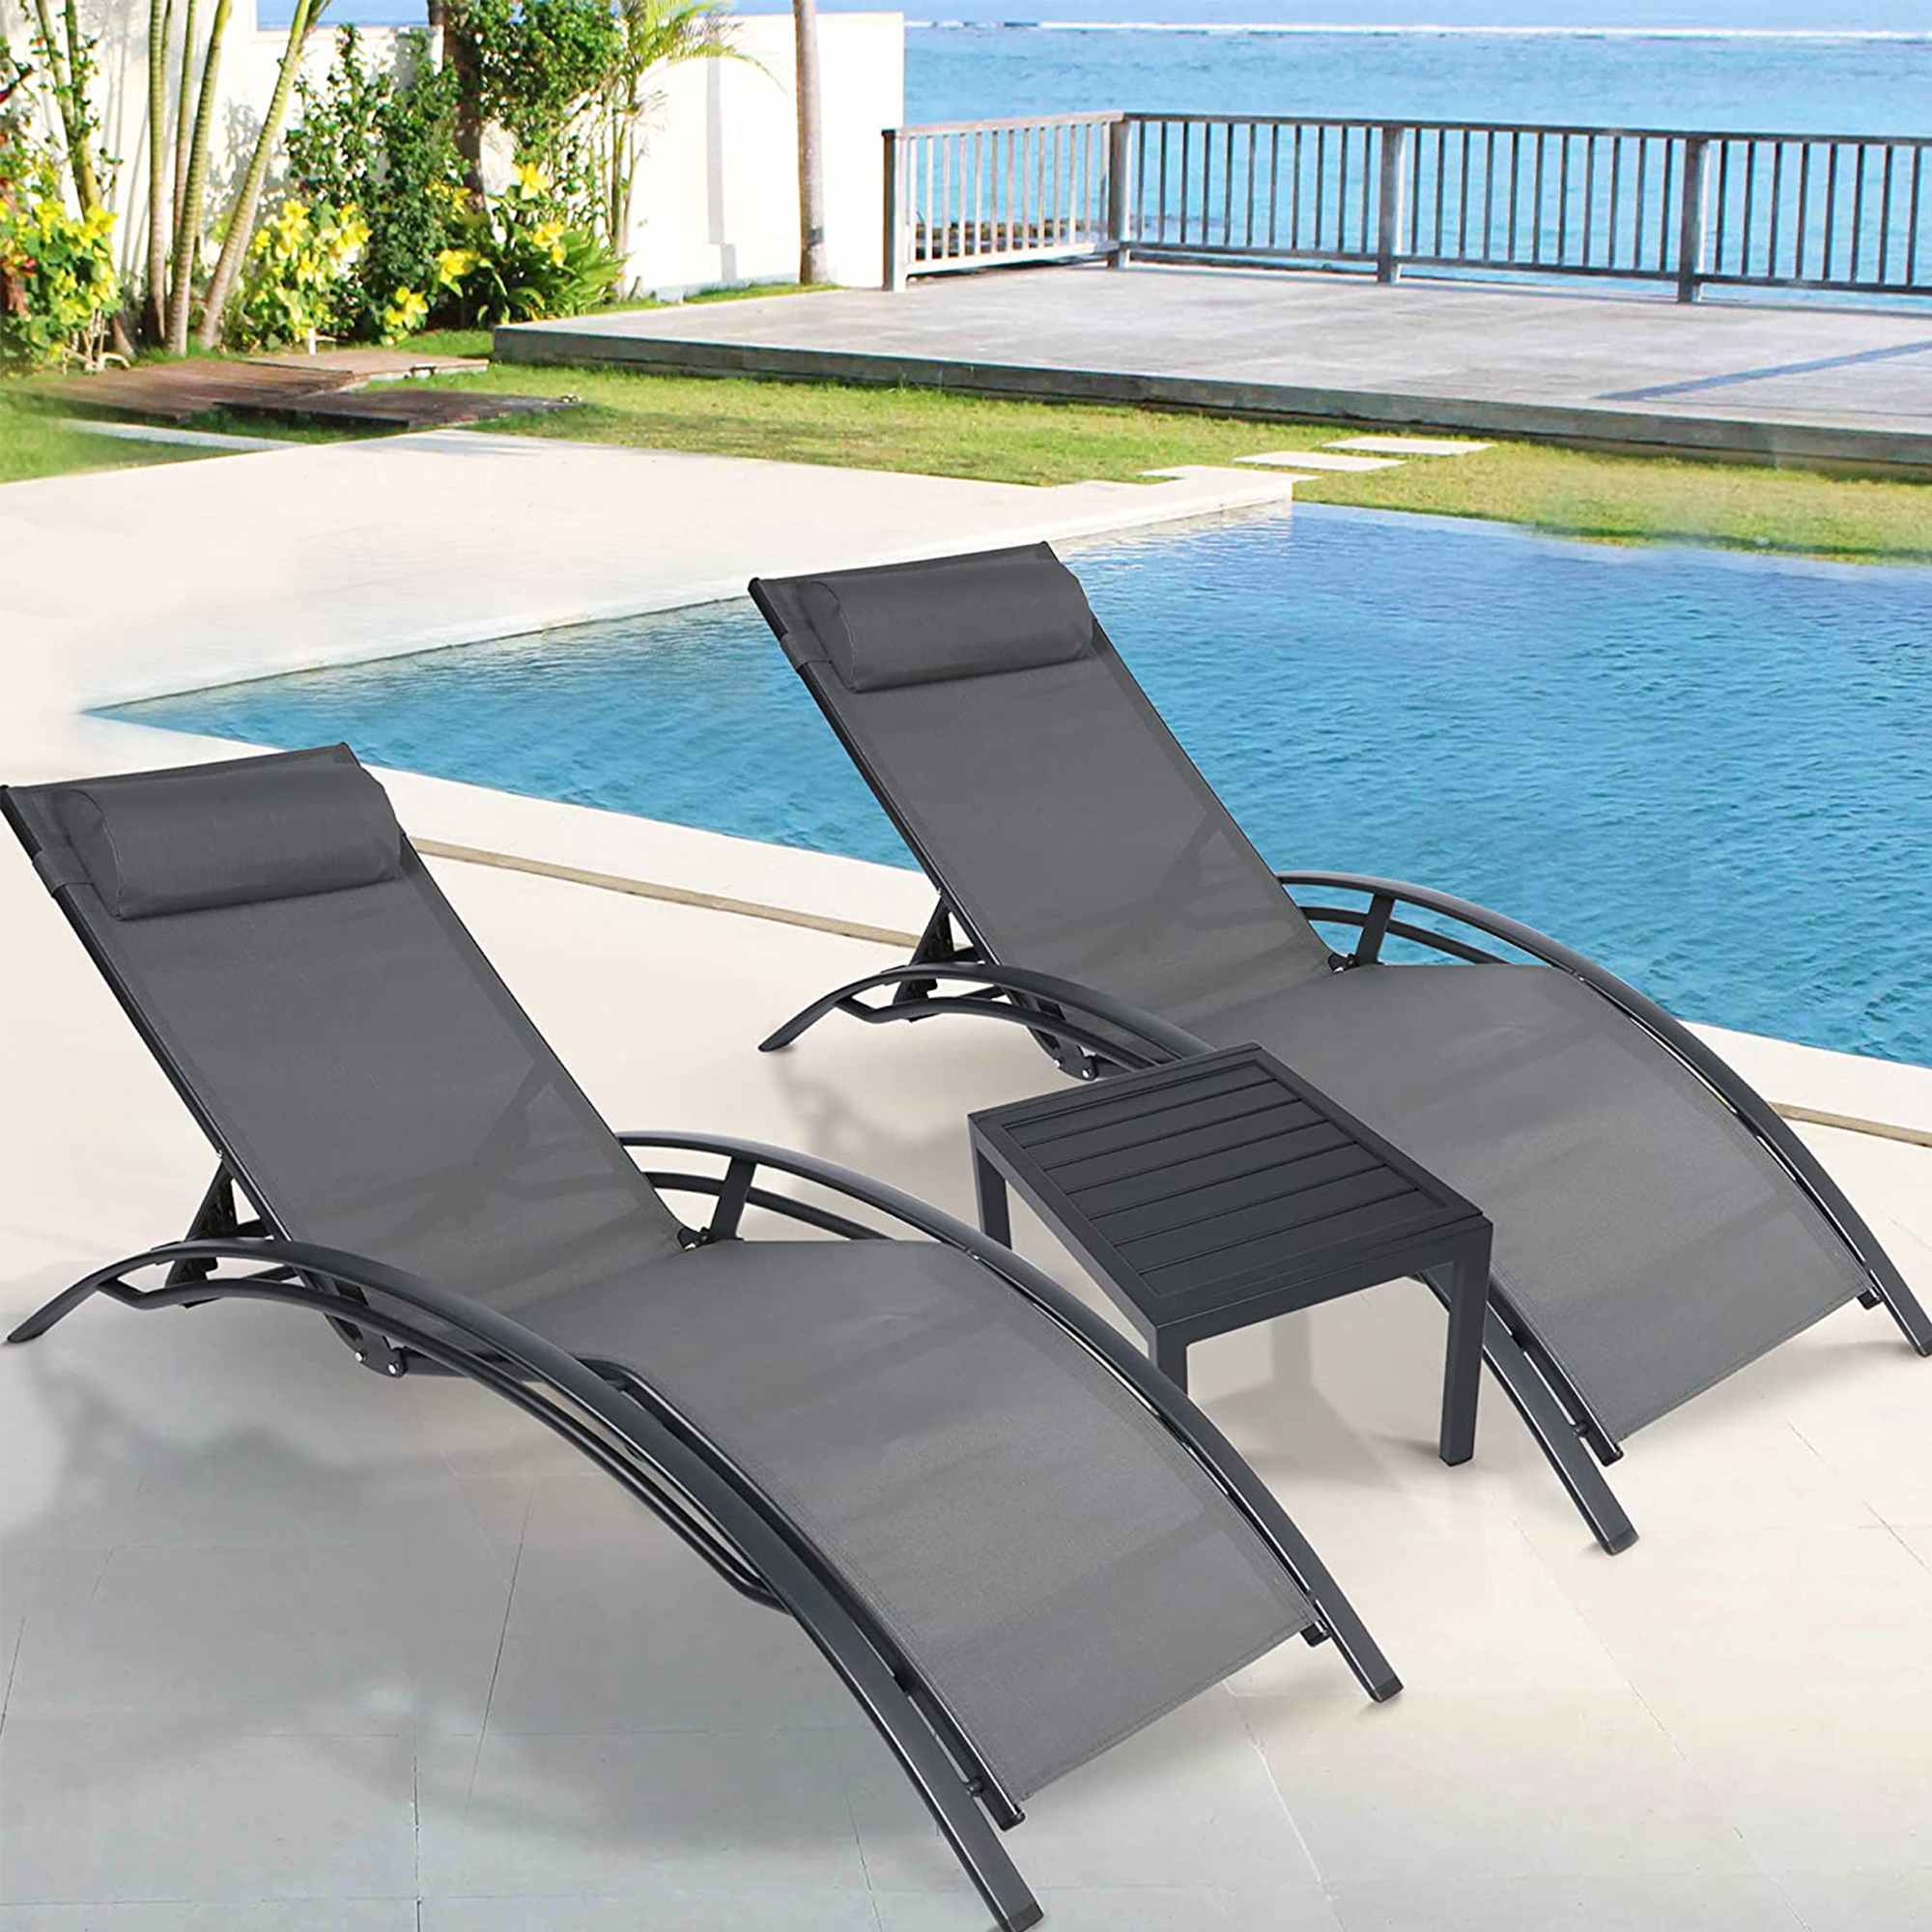 KARMAS PRODUCT Chaise Lounge Aluminum Chair Set of 2 w/Tea Table, Patio Lounge Chair Reclining 4 Adjustable Back Position w/Removable Cushions for Outdoor Beach Pool Backyard Garden Lawn,Gray - image 2 of 7